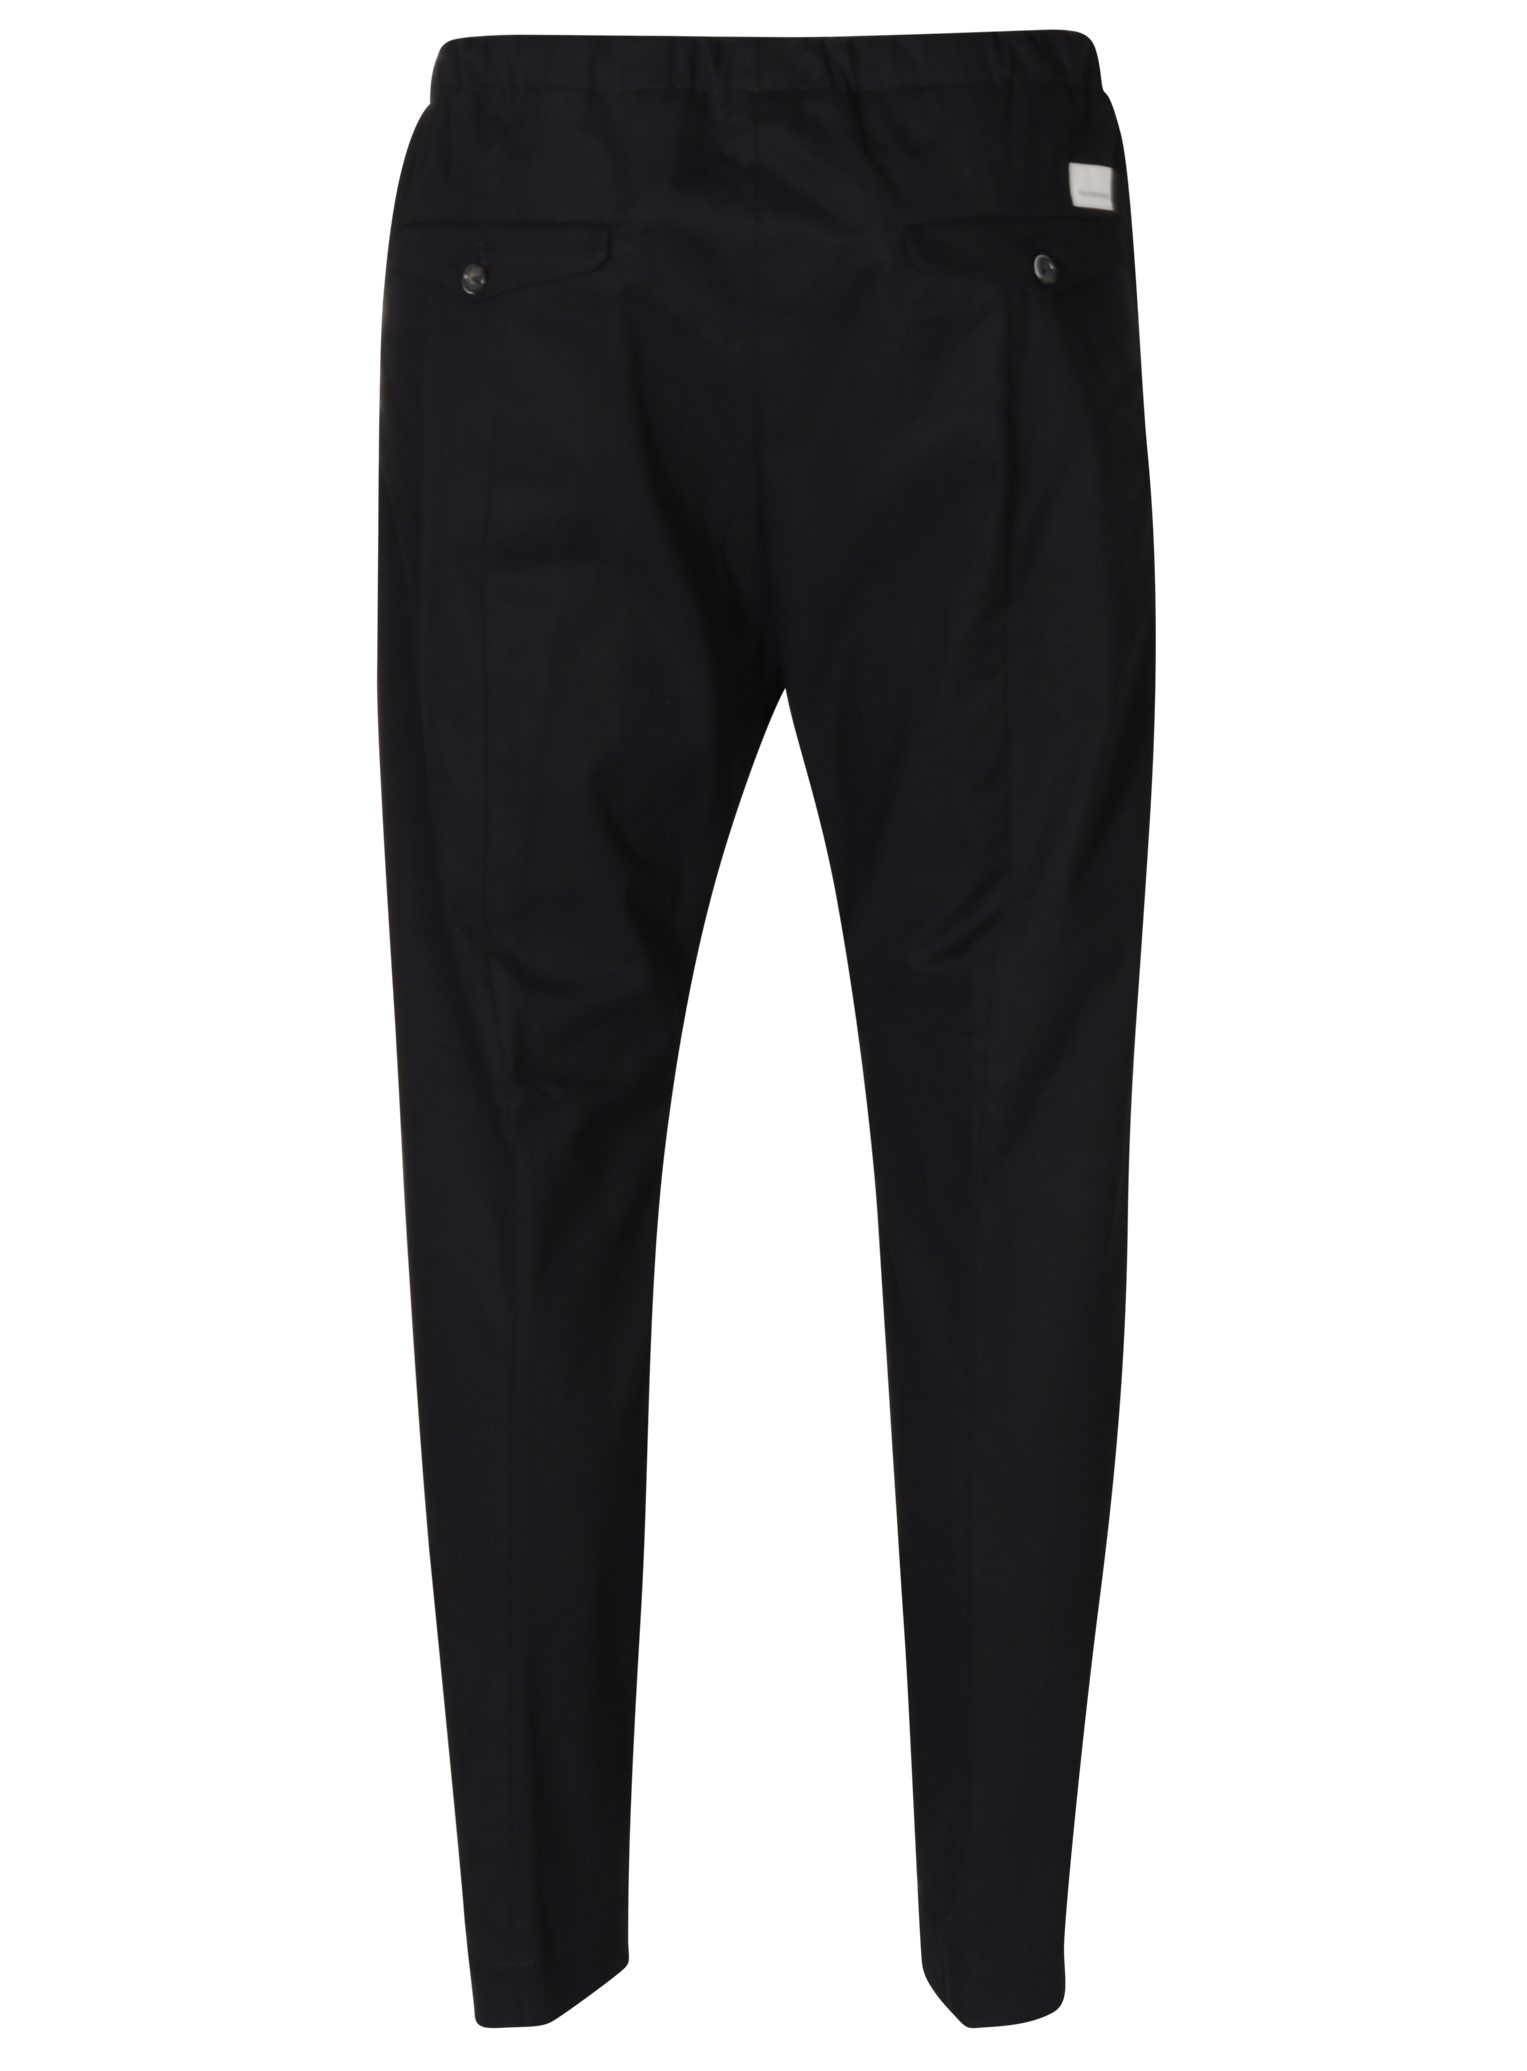 NINE:INTHE:MORNING Mirco Carrot Cotton Stretch Pant in Black 54